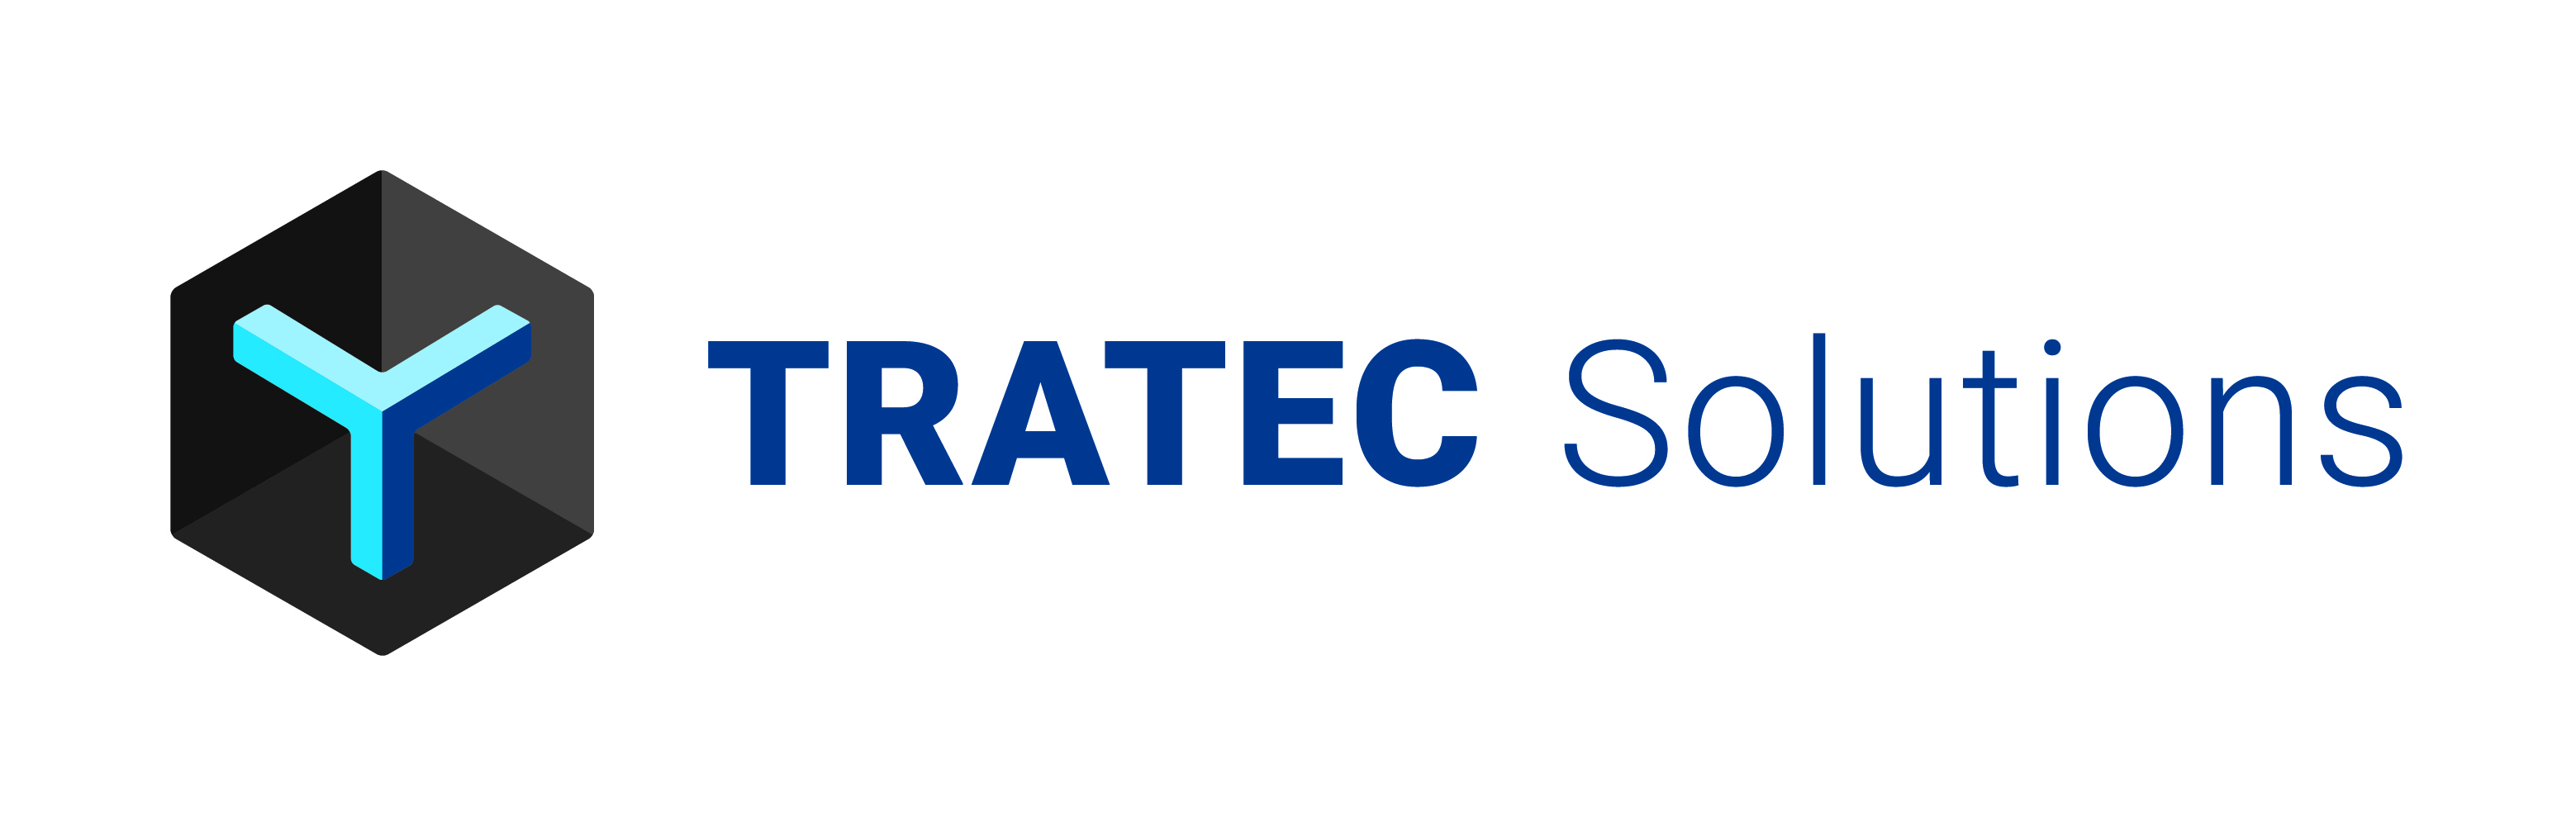 Tratec Solutions